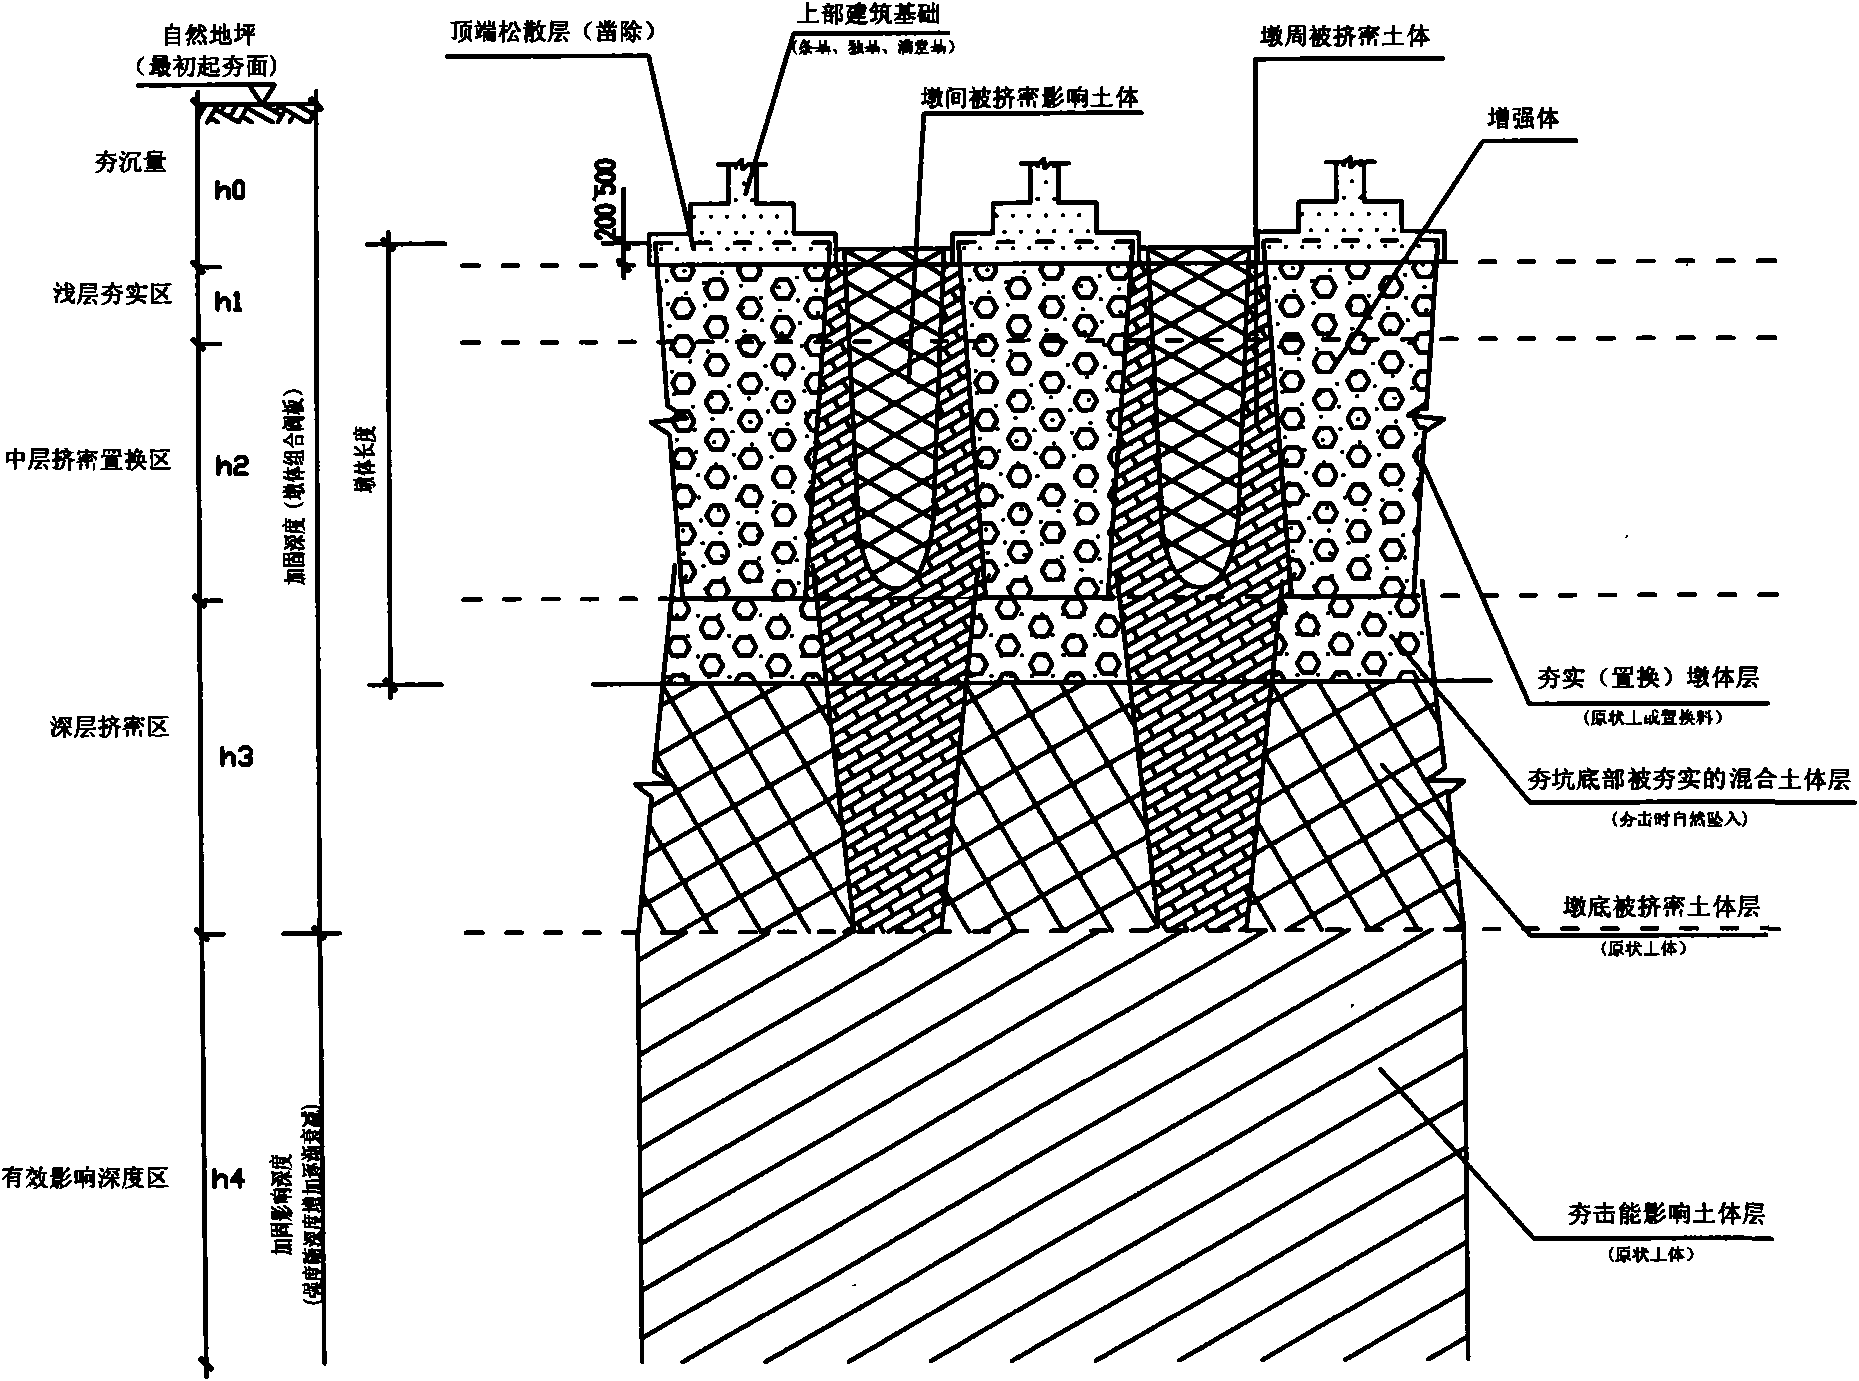 Method for treating foundation by combined hammers